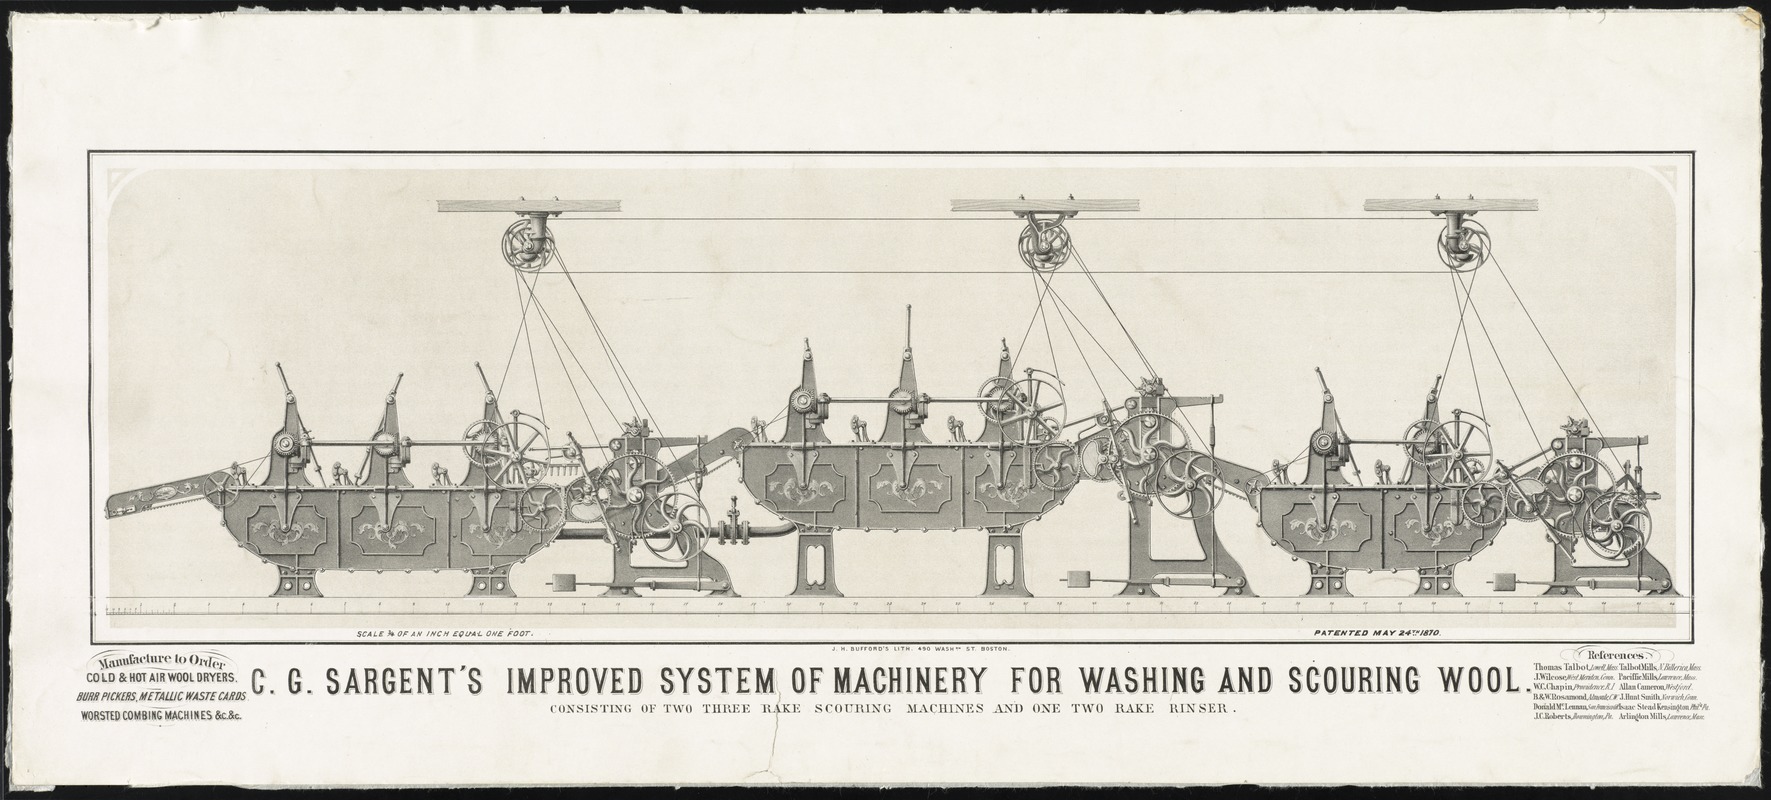 C.G. Sargent's Improved System of Machinery for Washing and Scouring Wool